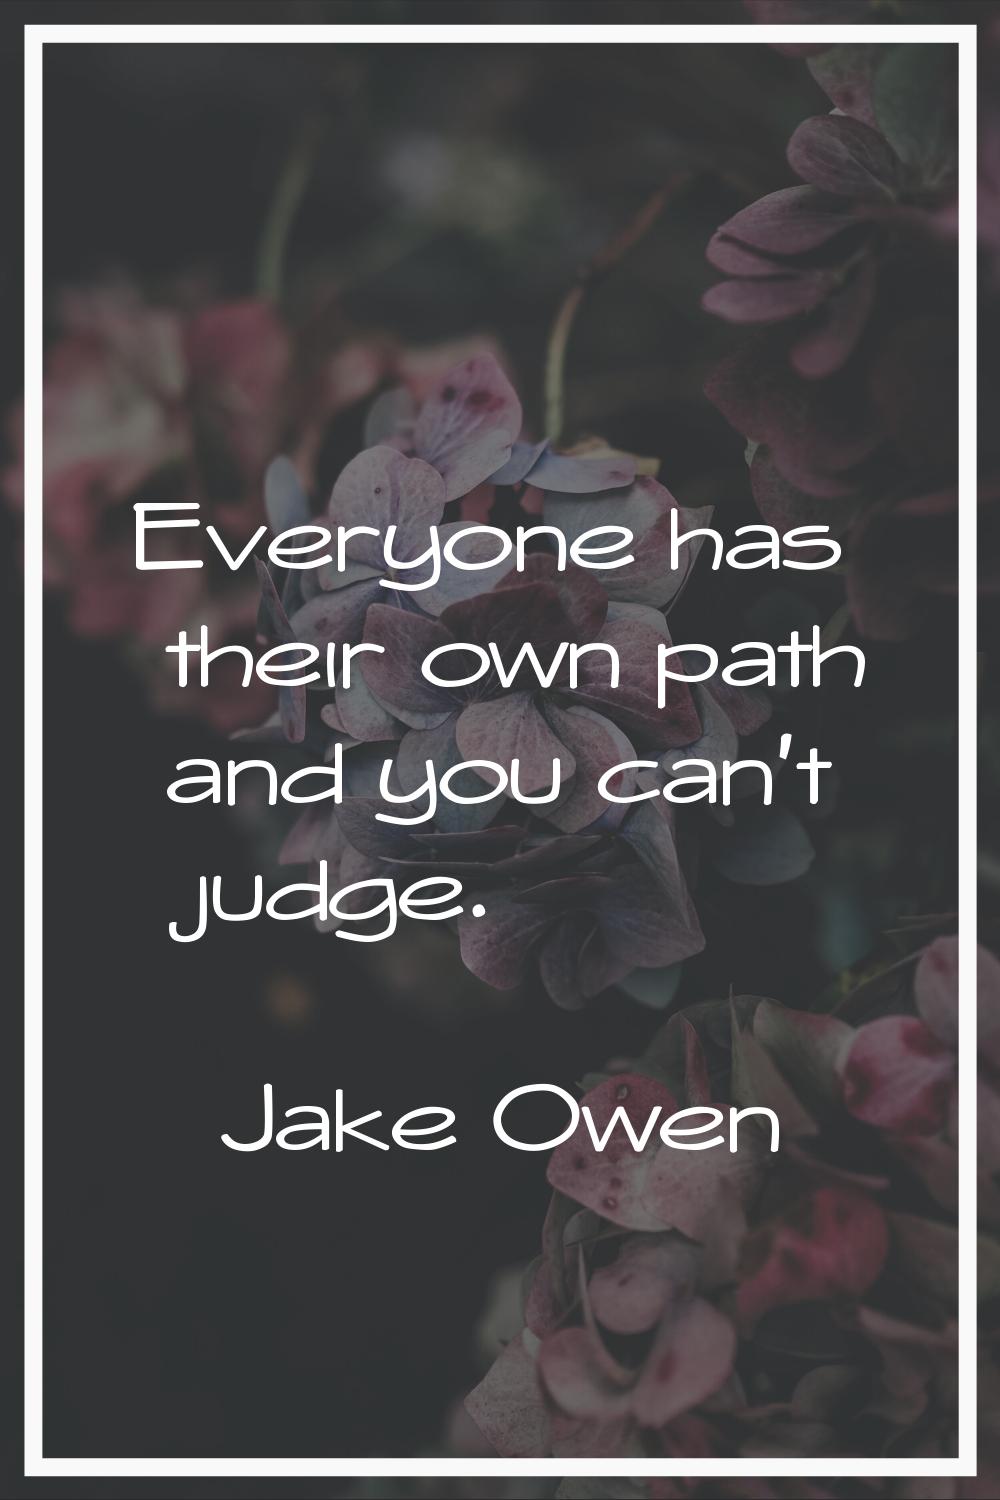 Everyone has their own path and you can't judge.